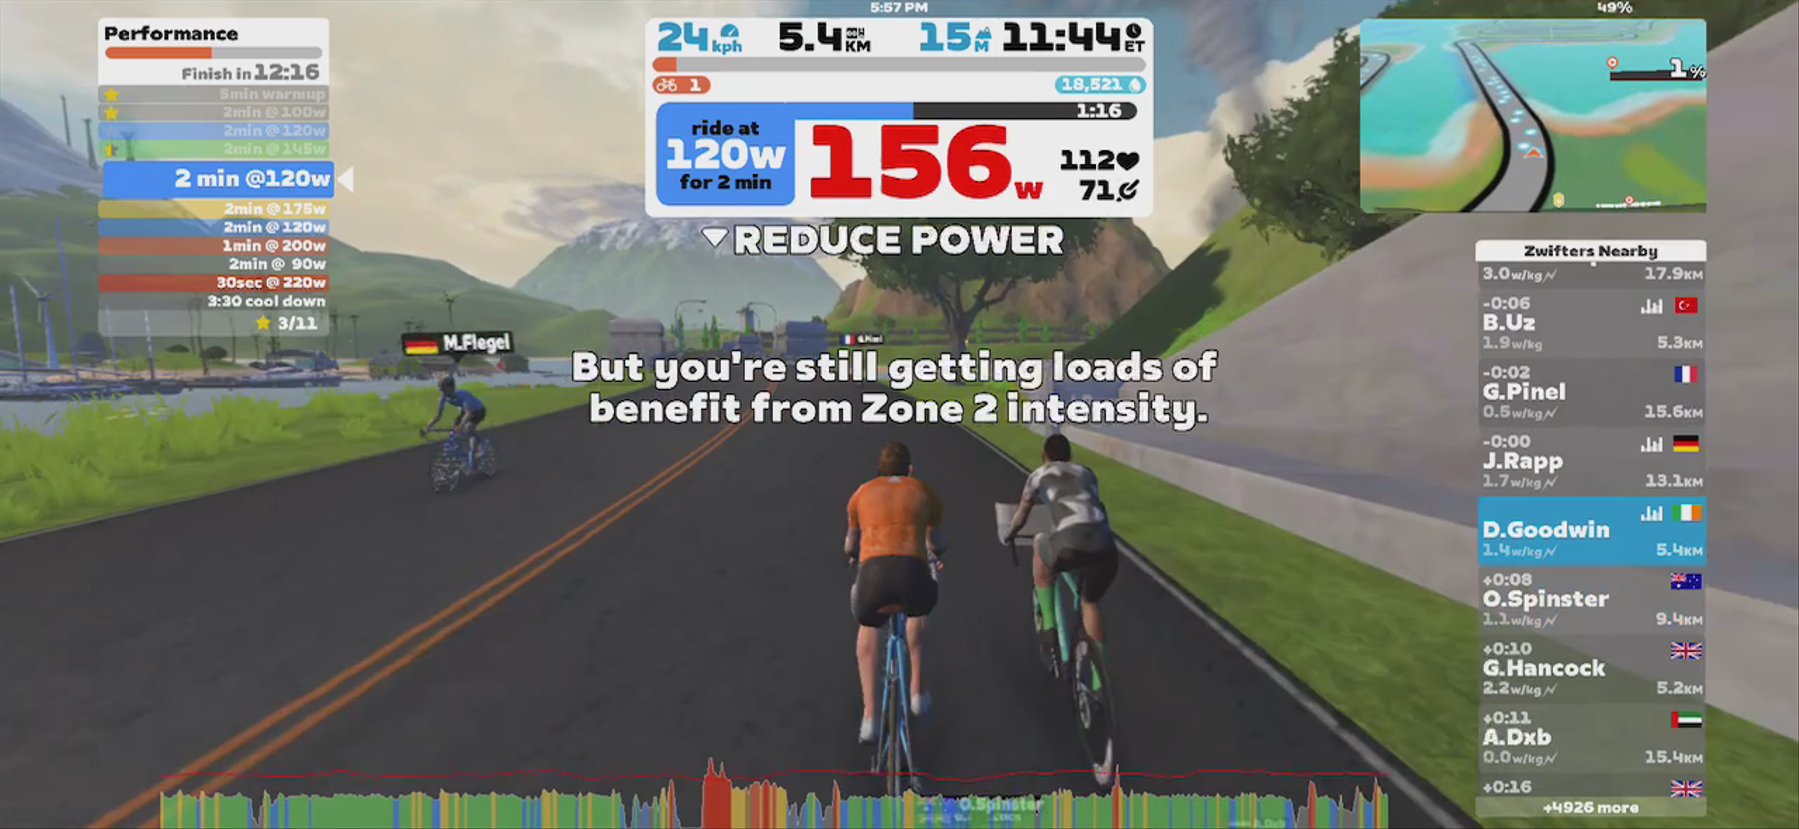 Zwift - Performance on Road to Sky in Watopia